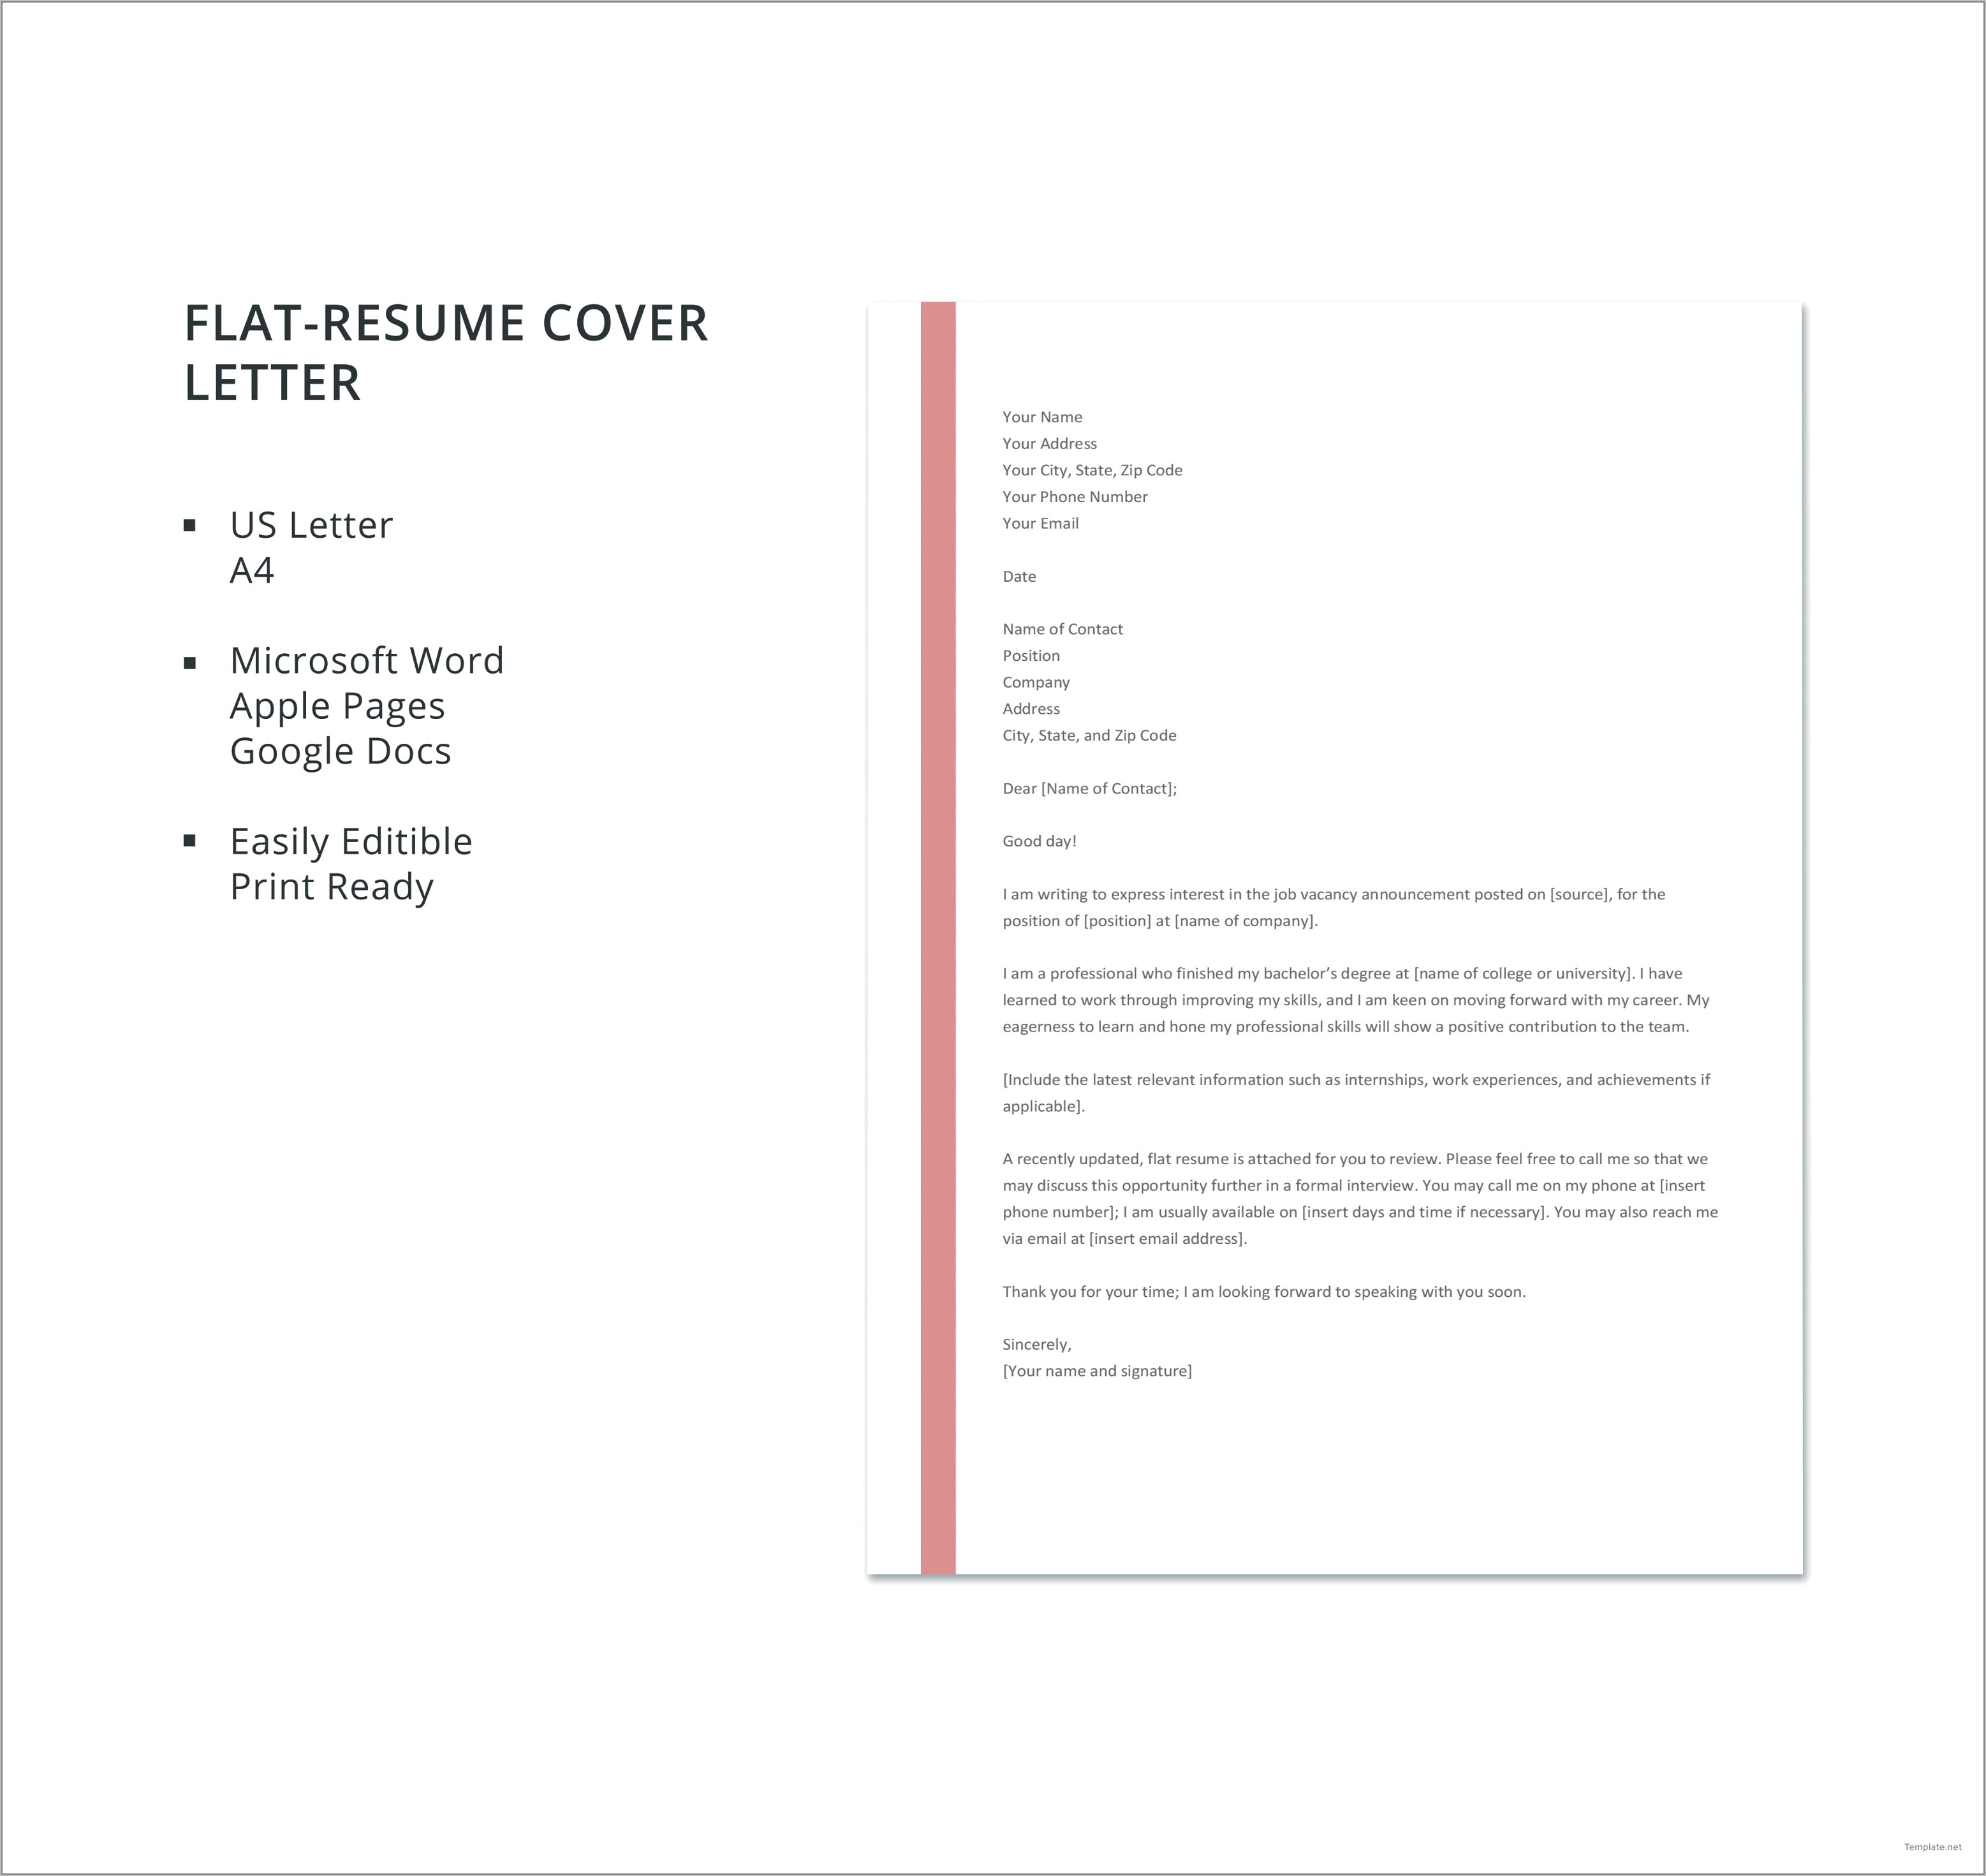 Microsoft Word Templates Resume Cover Letter